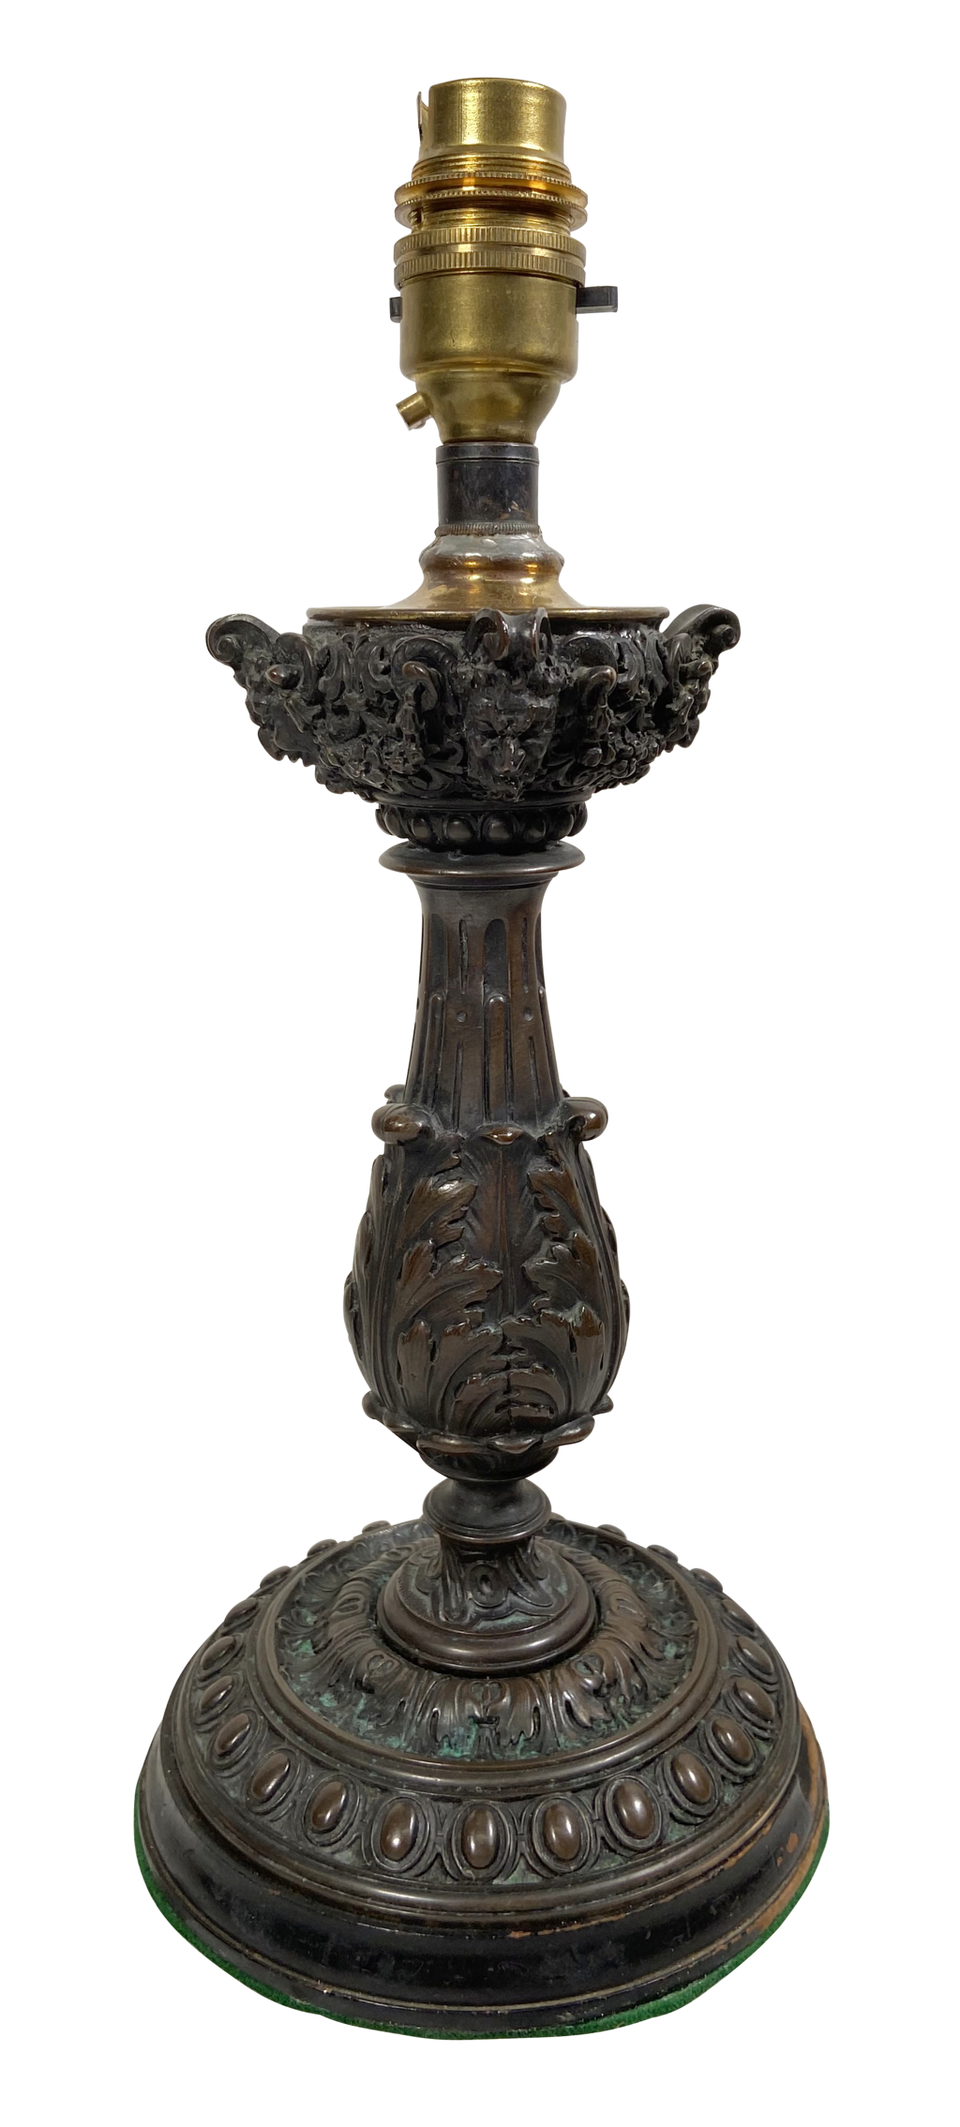 Grand Tour Bronze Baluster Column Candlestick Table Lamp with Acanthus Leaf Design